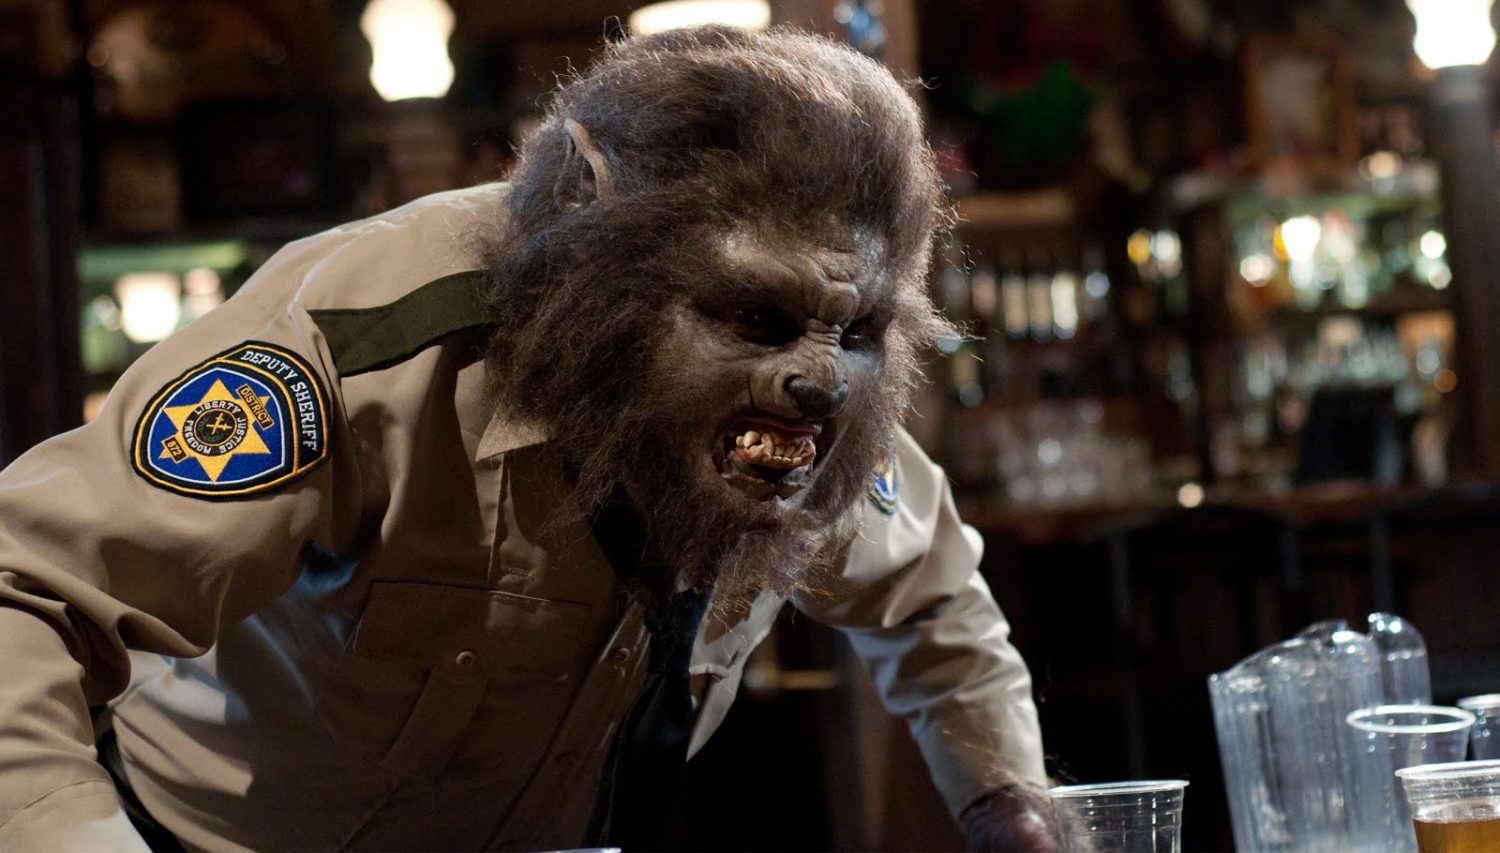 The official review of WolfCop by ModernHorrors.com